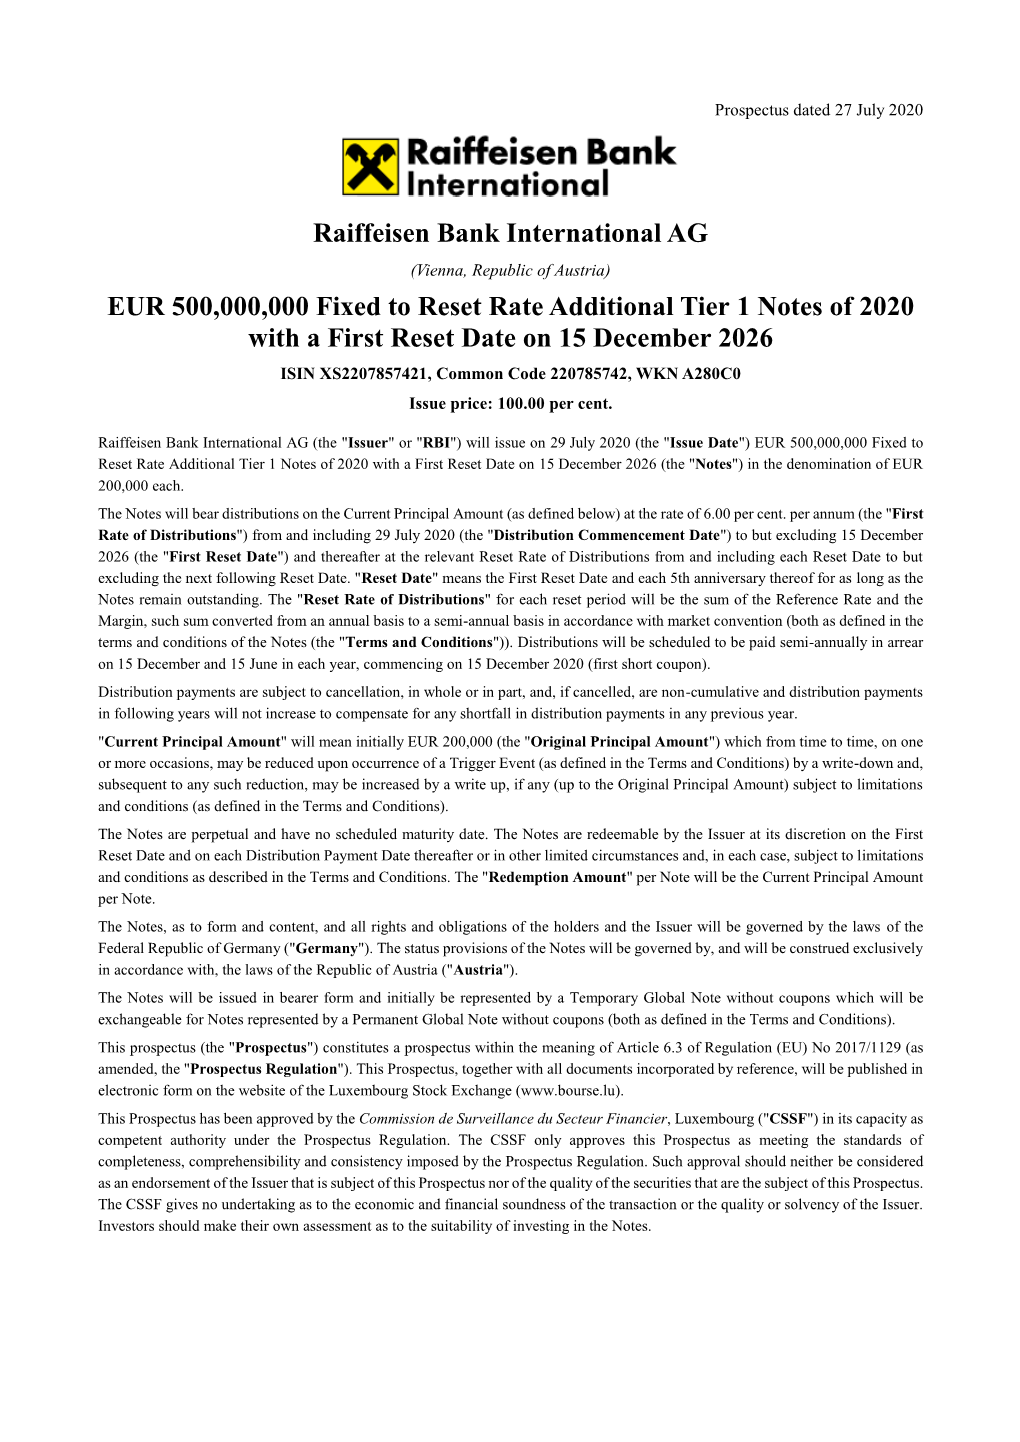 Raiffeisen Bank International AG EUR 500,000,000 Fixed to Reset Rate Additional Tier 1 Notes of 2020 with a First Reset Date On